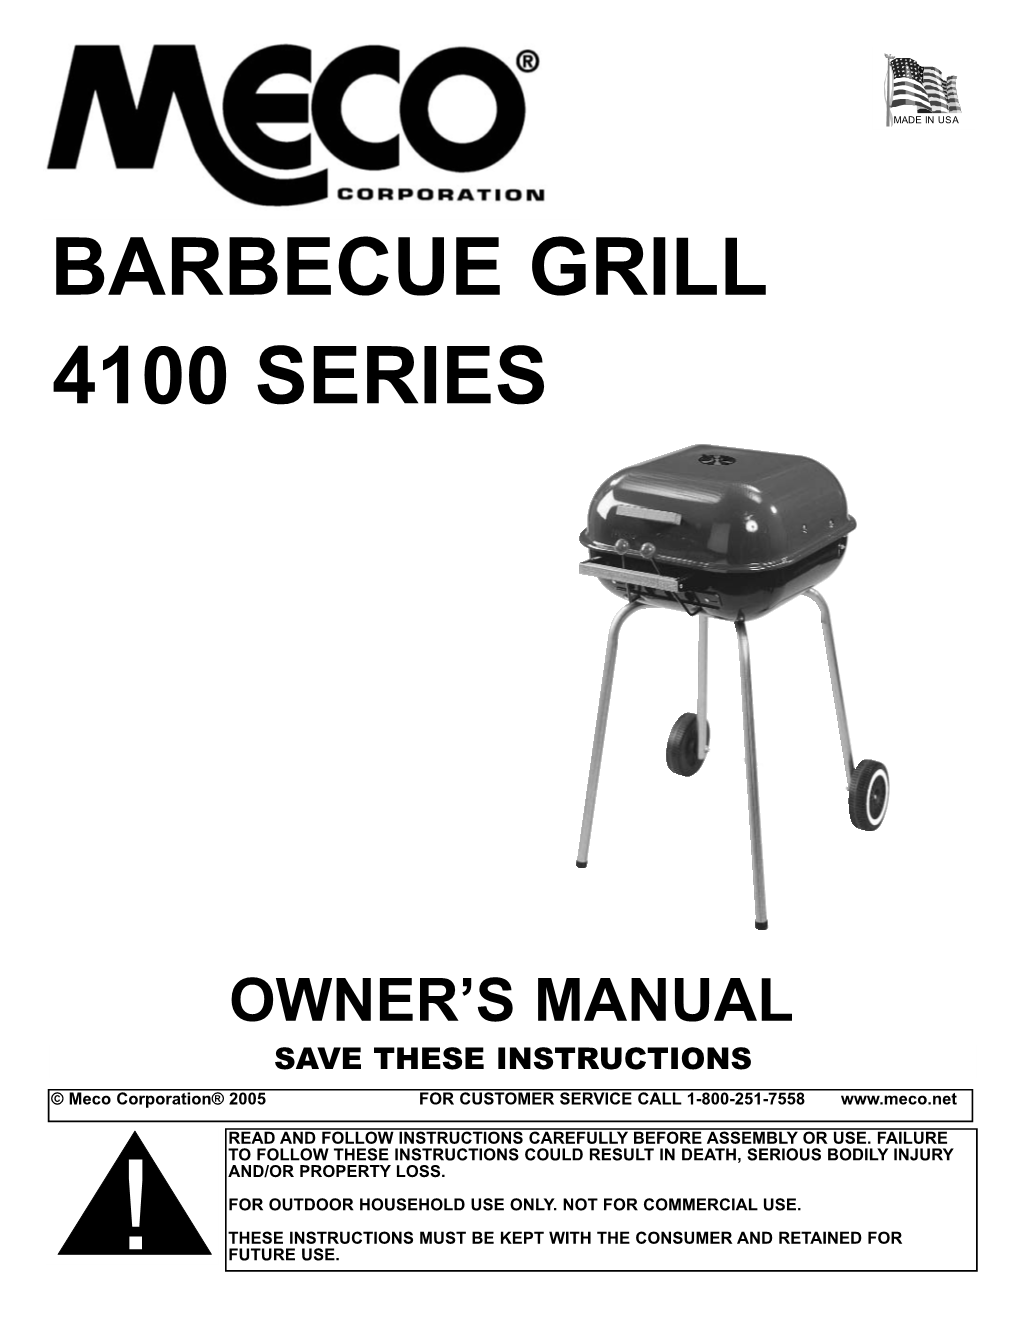 Barbecue Grill 4100 Series